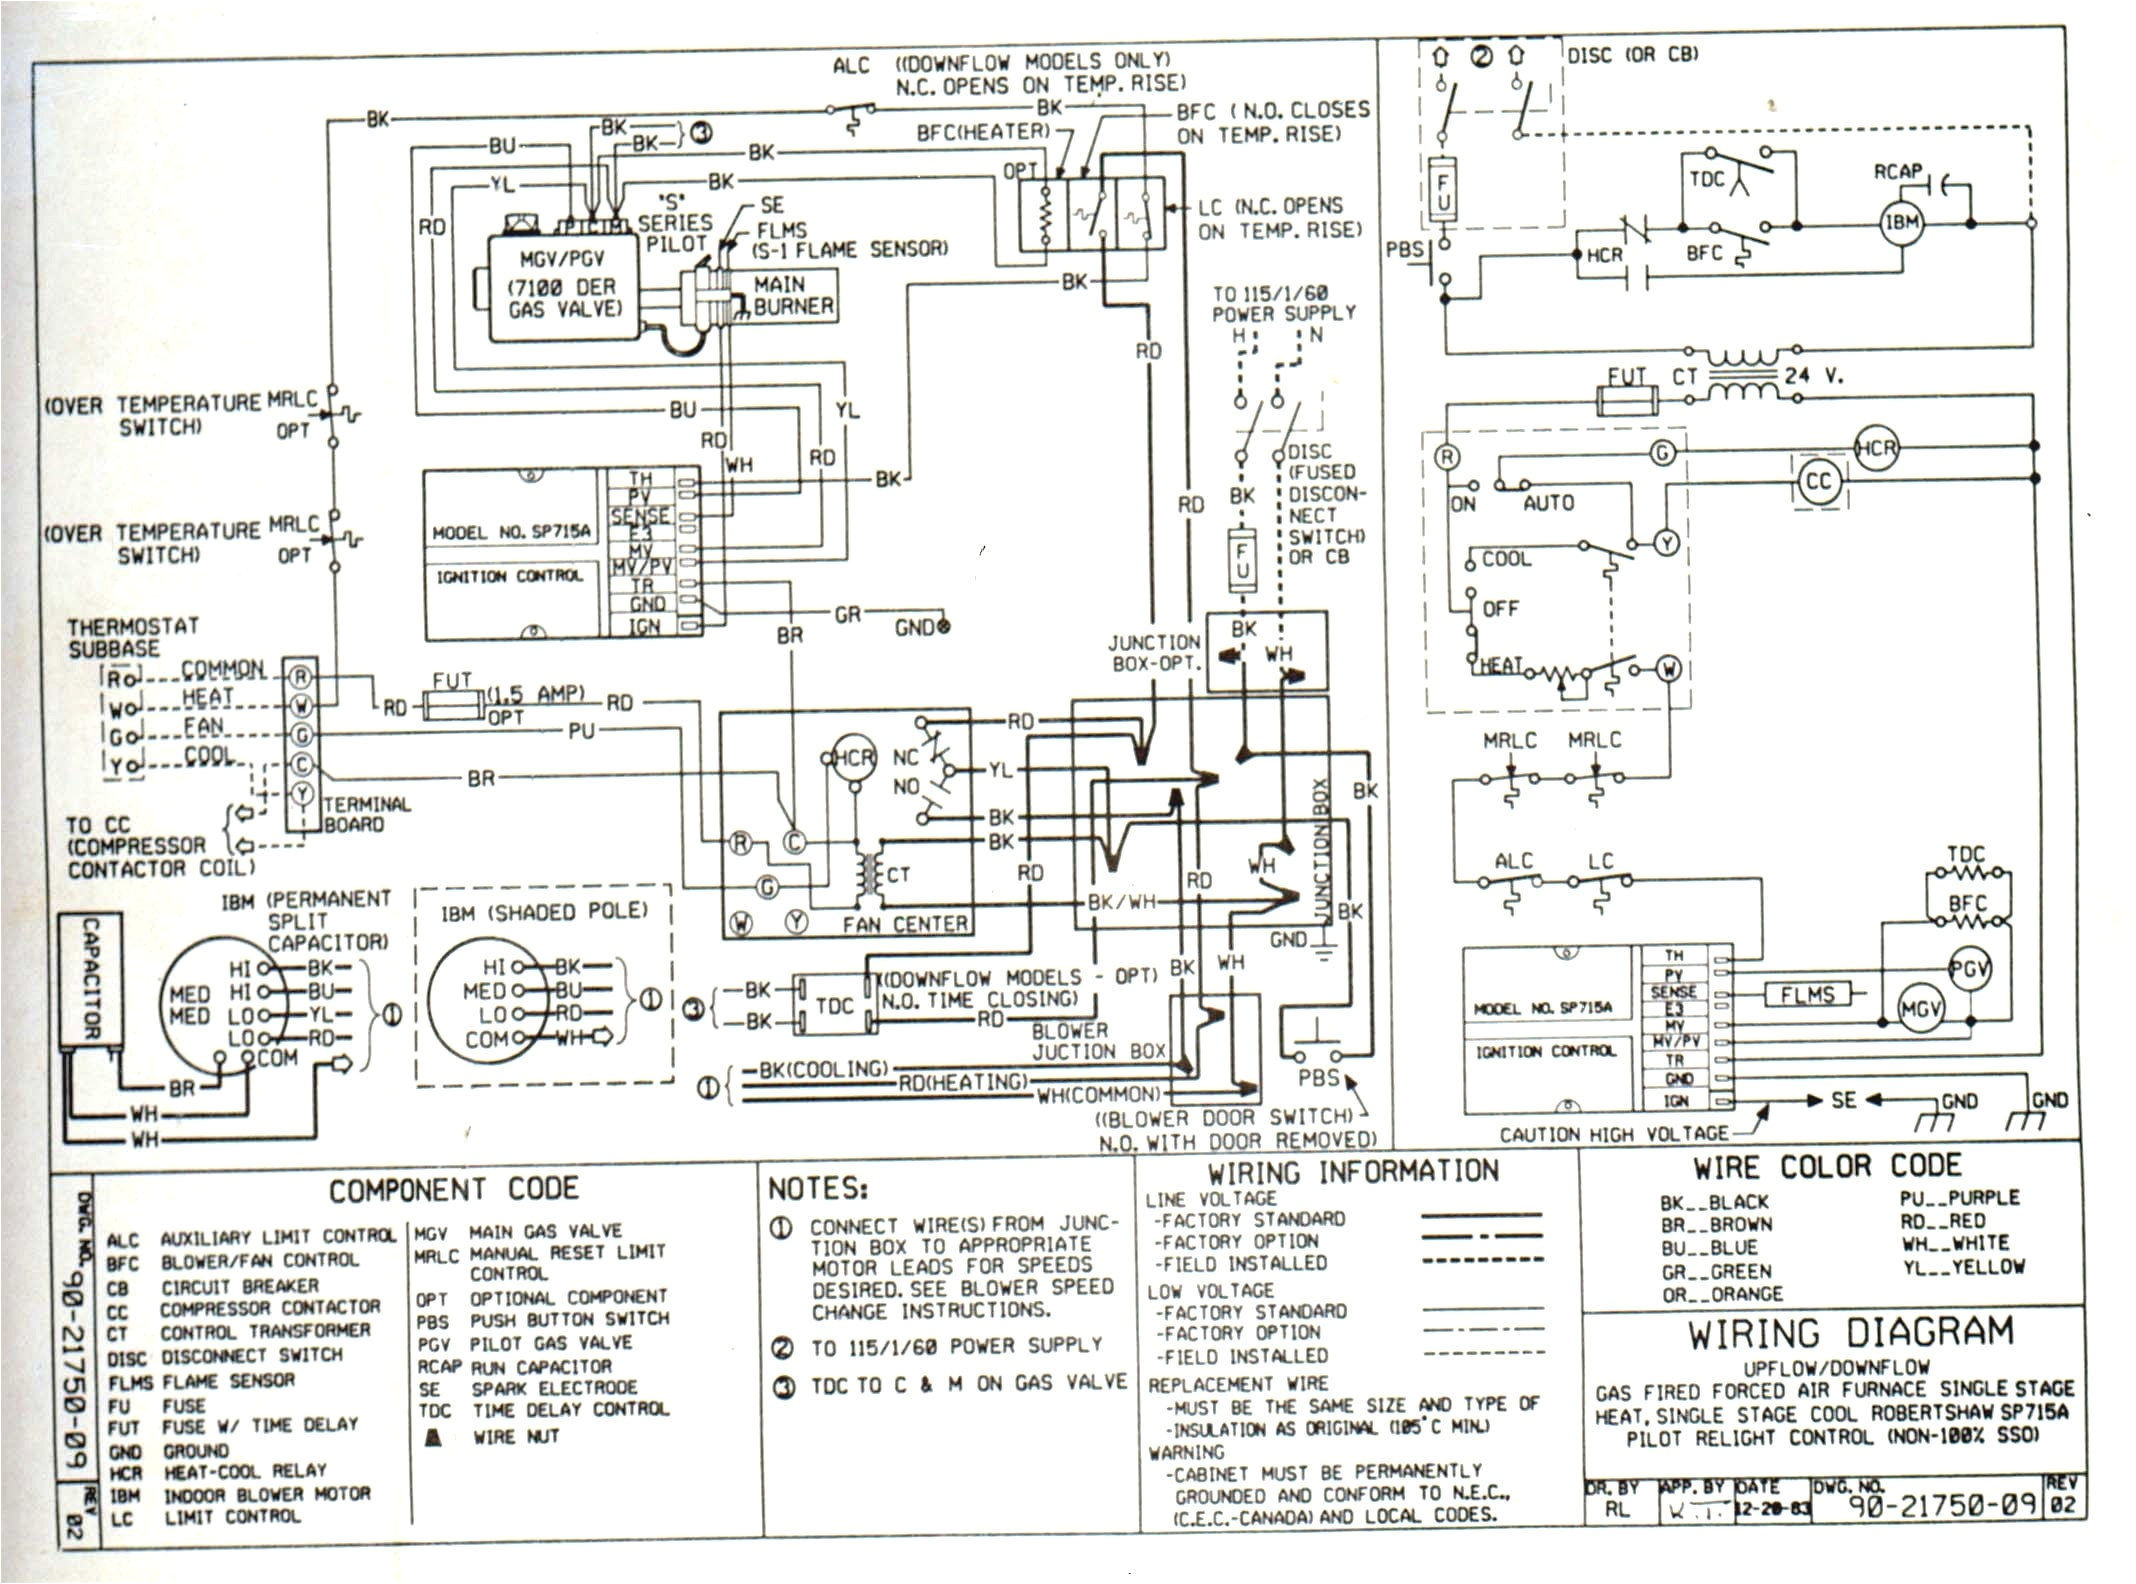 york condenser wiring diagram wiring diagram for york heat pump inspirationa hid wiring diagram with relay and capacitor best inspiration 5d jpg